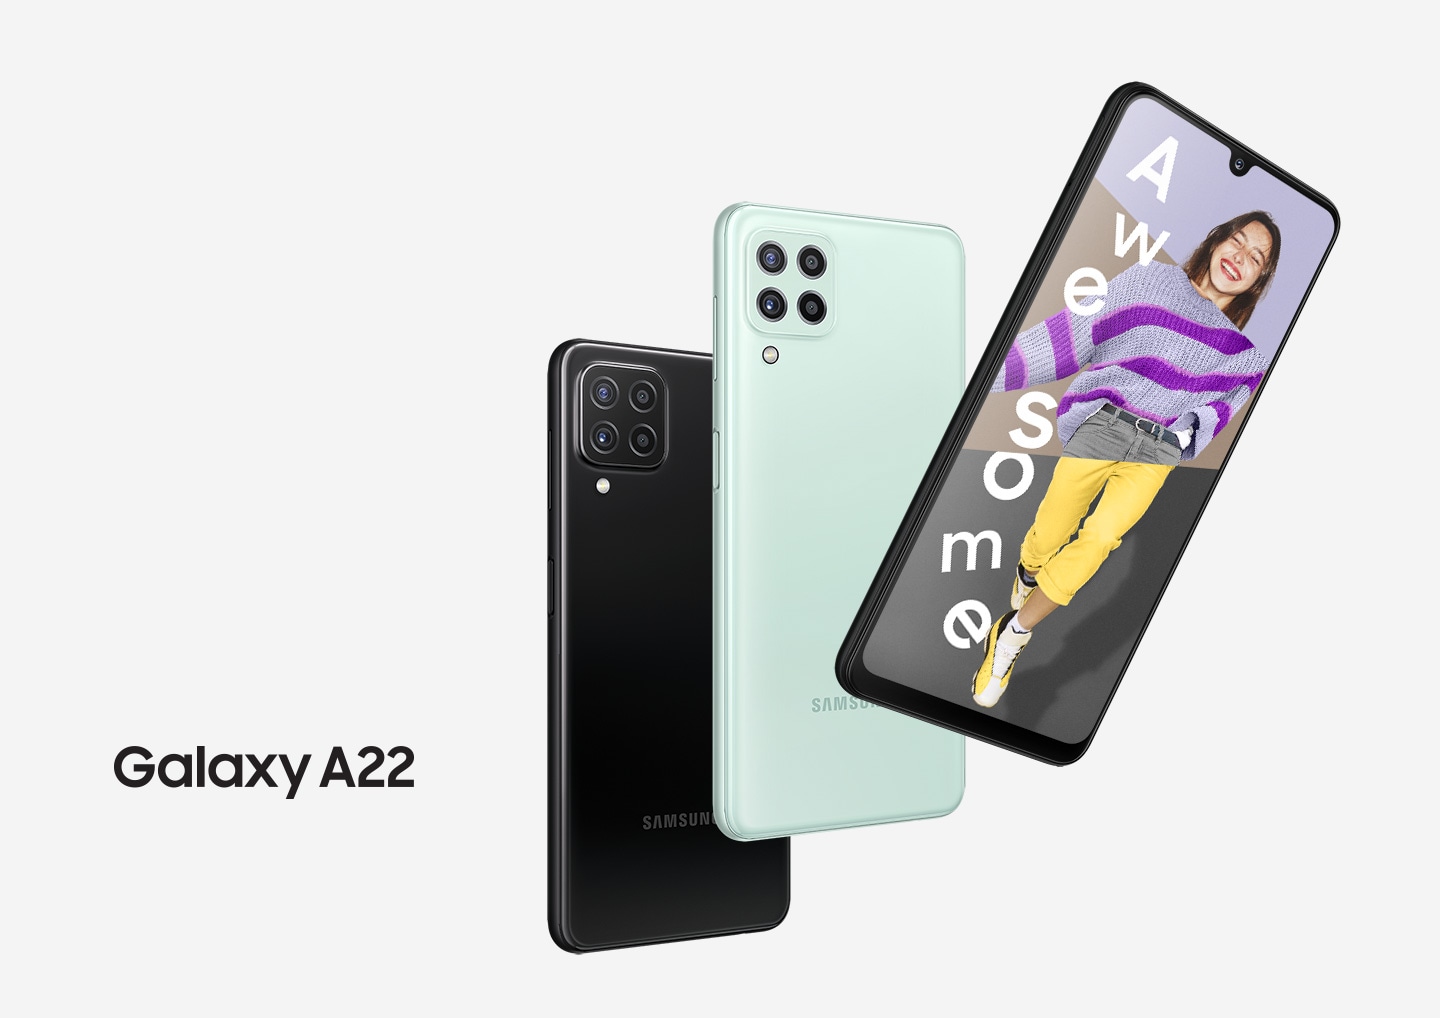 Three Galaxy A22 phones in a row. Two seen from the rear to show the rear camera and the colors black and mint. One seen from the front, and onscreen is a collage of a woman's head, a purple striped sweater and yellow pants with the word Awesome.